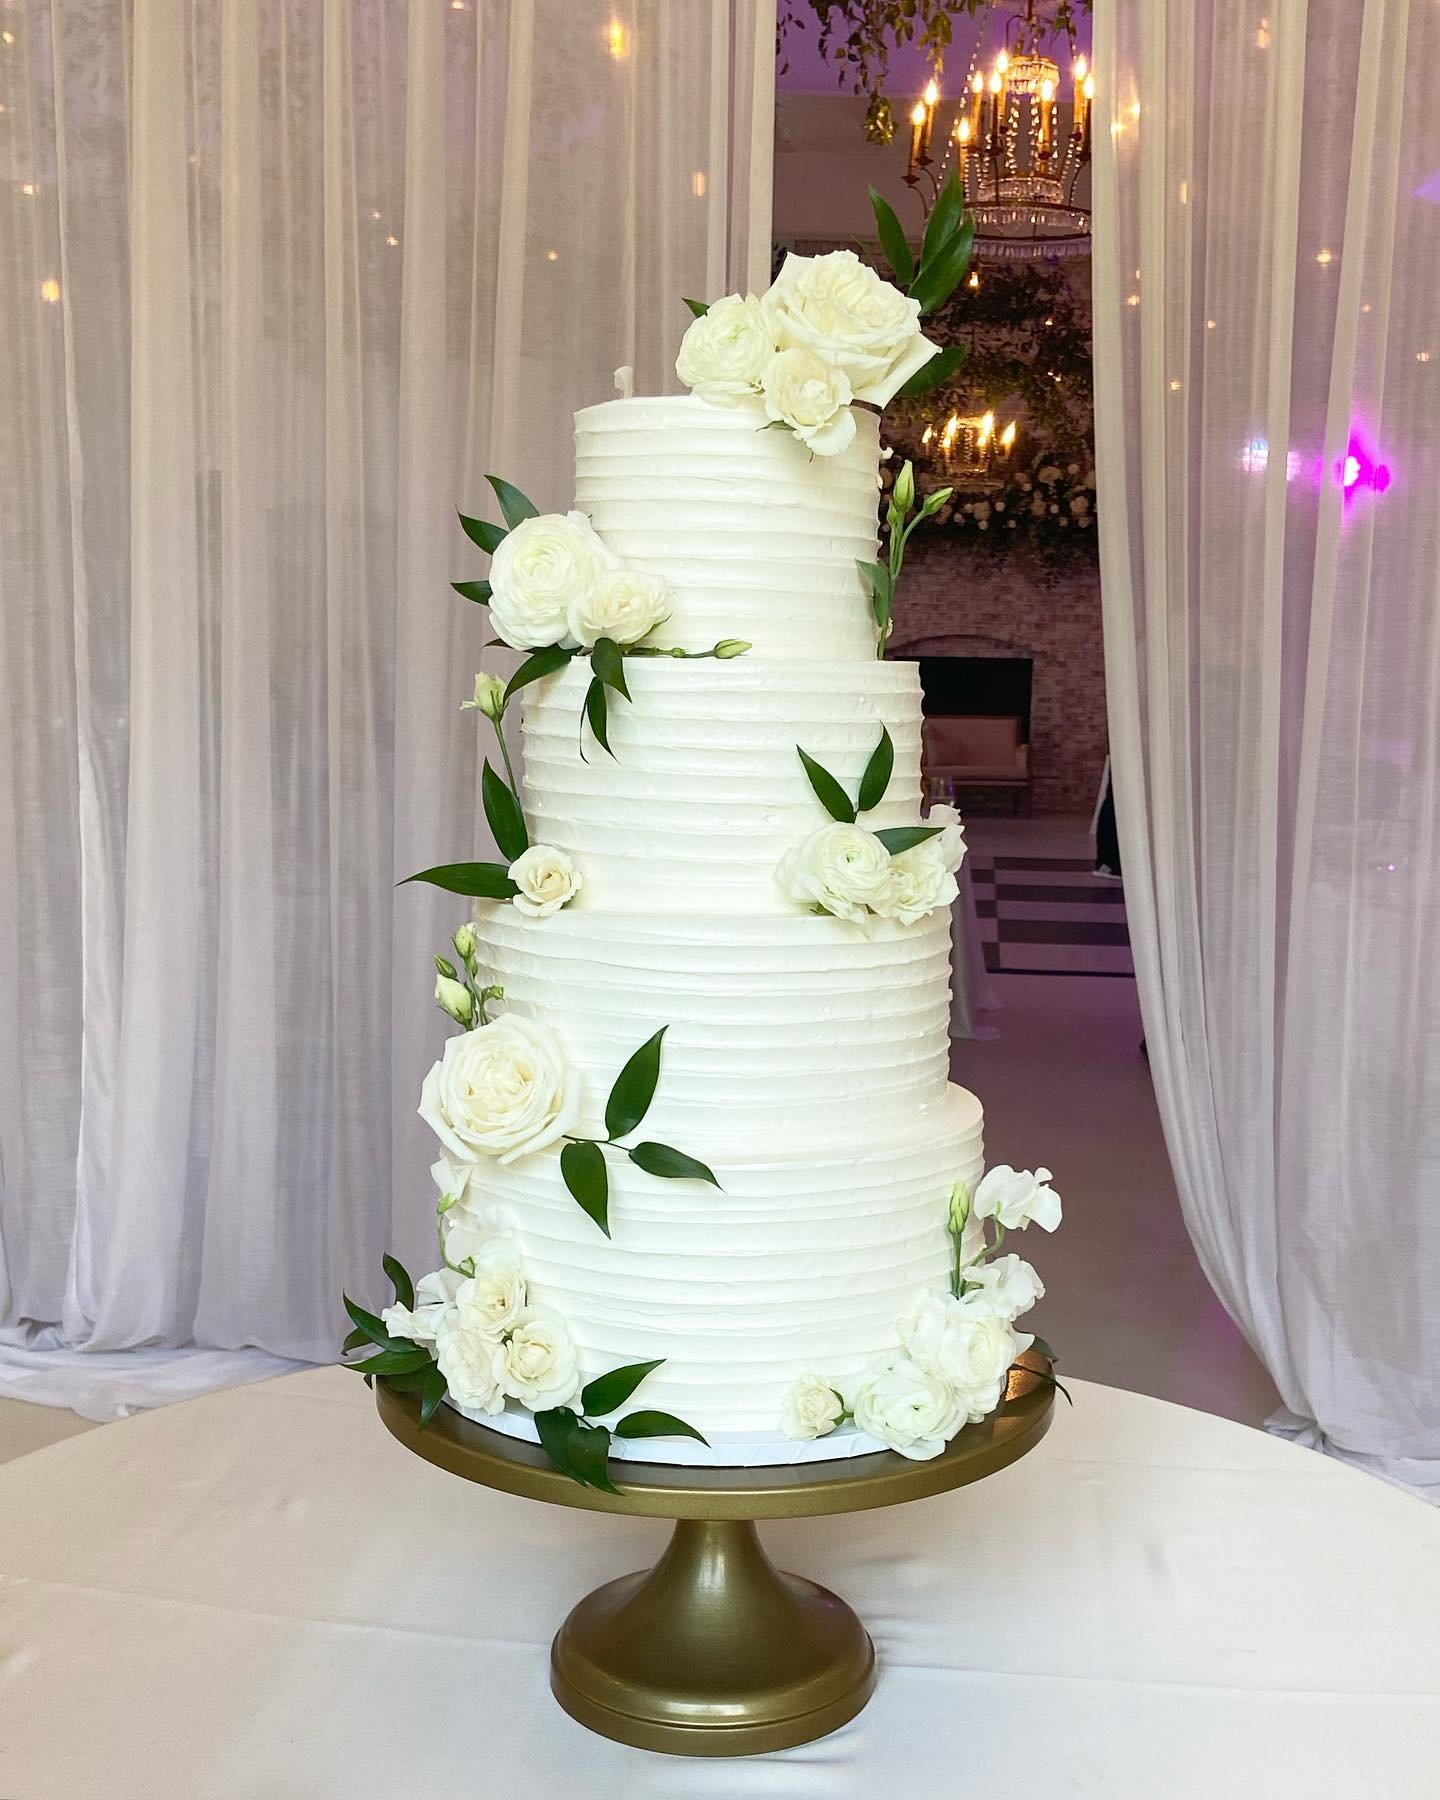 ✨🍰 Love is sweet, and so is this stunning buttercream wedding cake! 🌸💍 Indulge in layers of moist cake and creamy frosting, beautifully decorated with elegance and love. A delicious centerpiece for your special day! 

#WeddingCake #ButtercreamLove